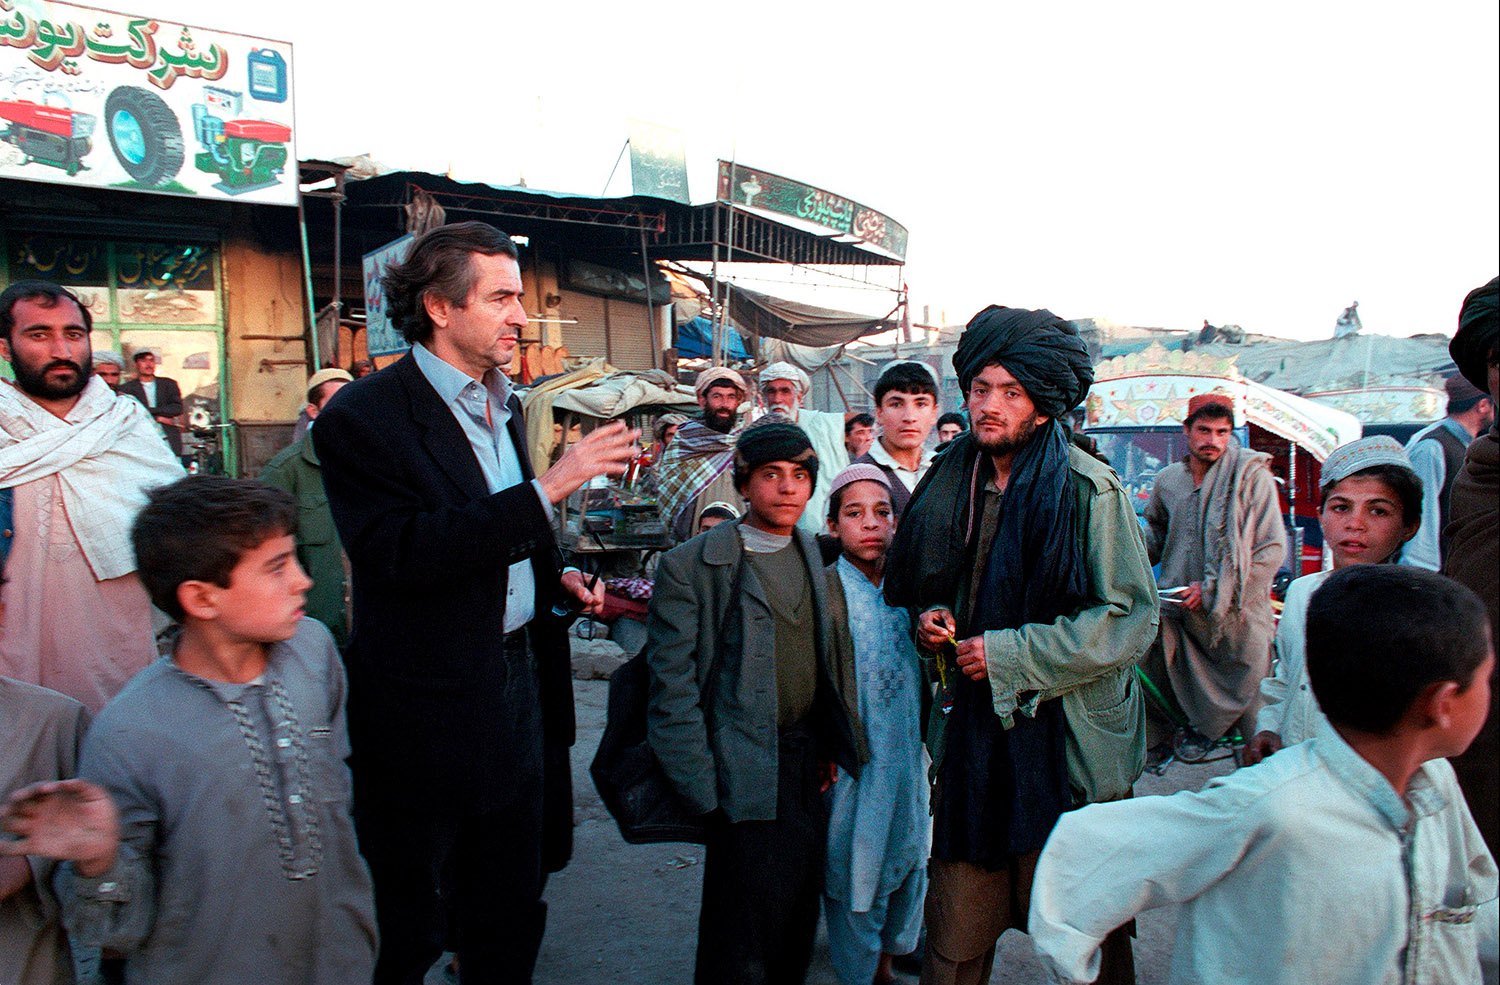 Bernard-Henri Lévy in a street in Kandahar, a Taliban stronghold. The philosopher discusses with the population.